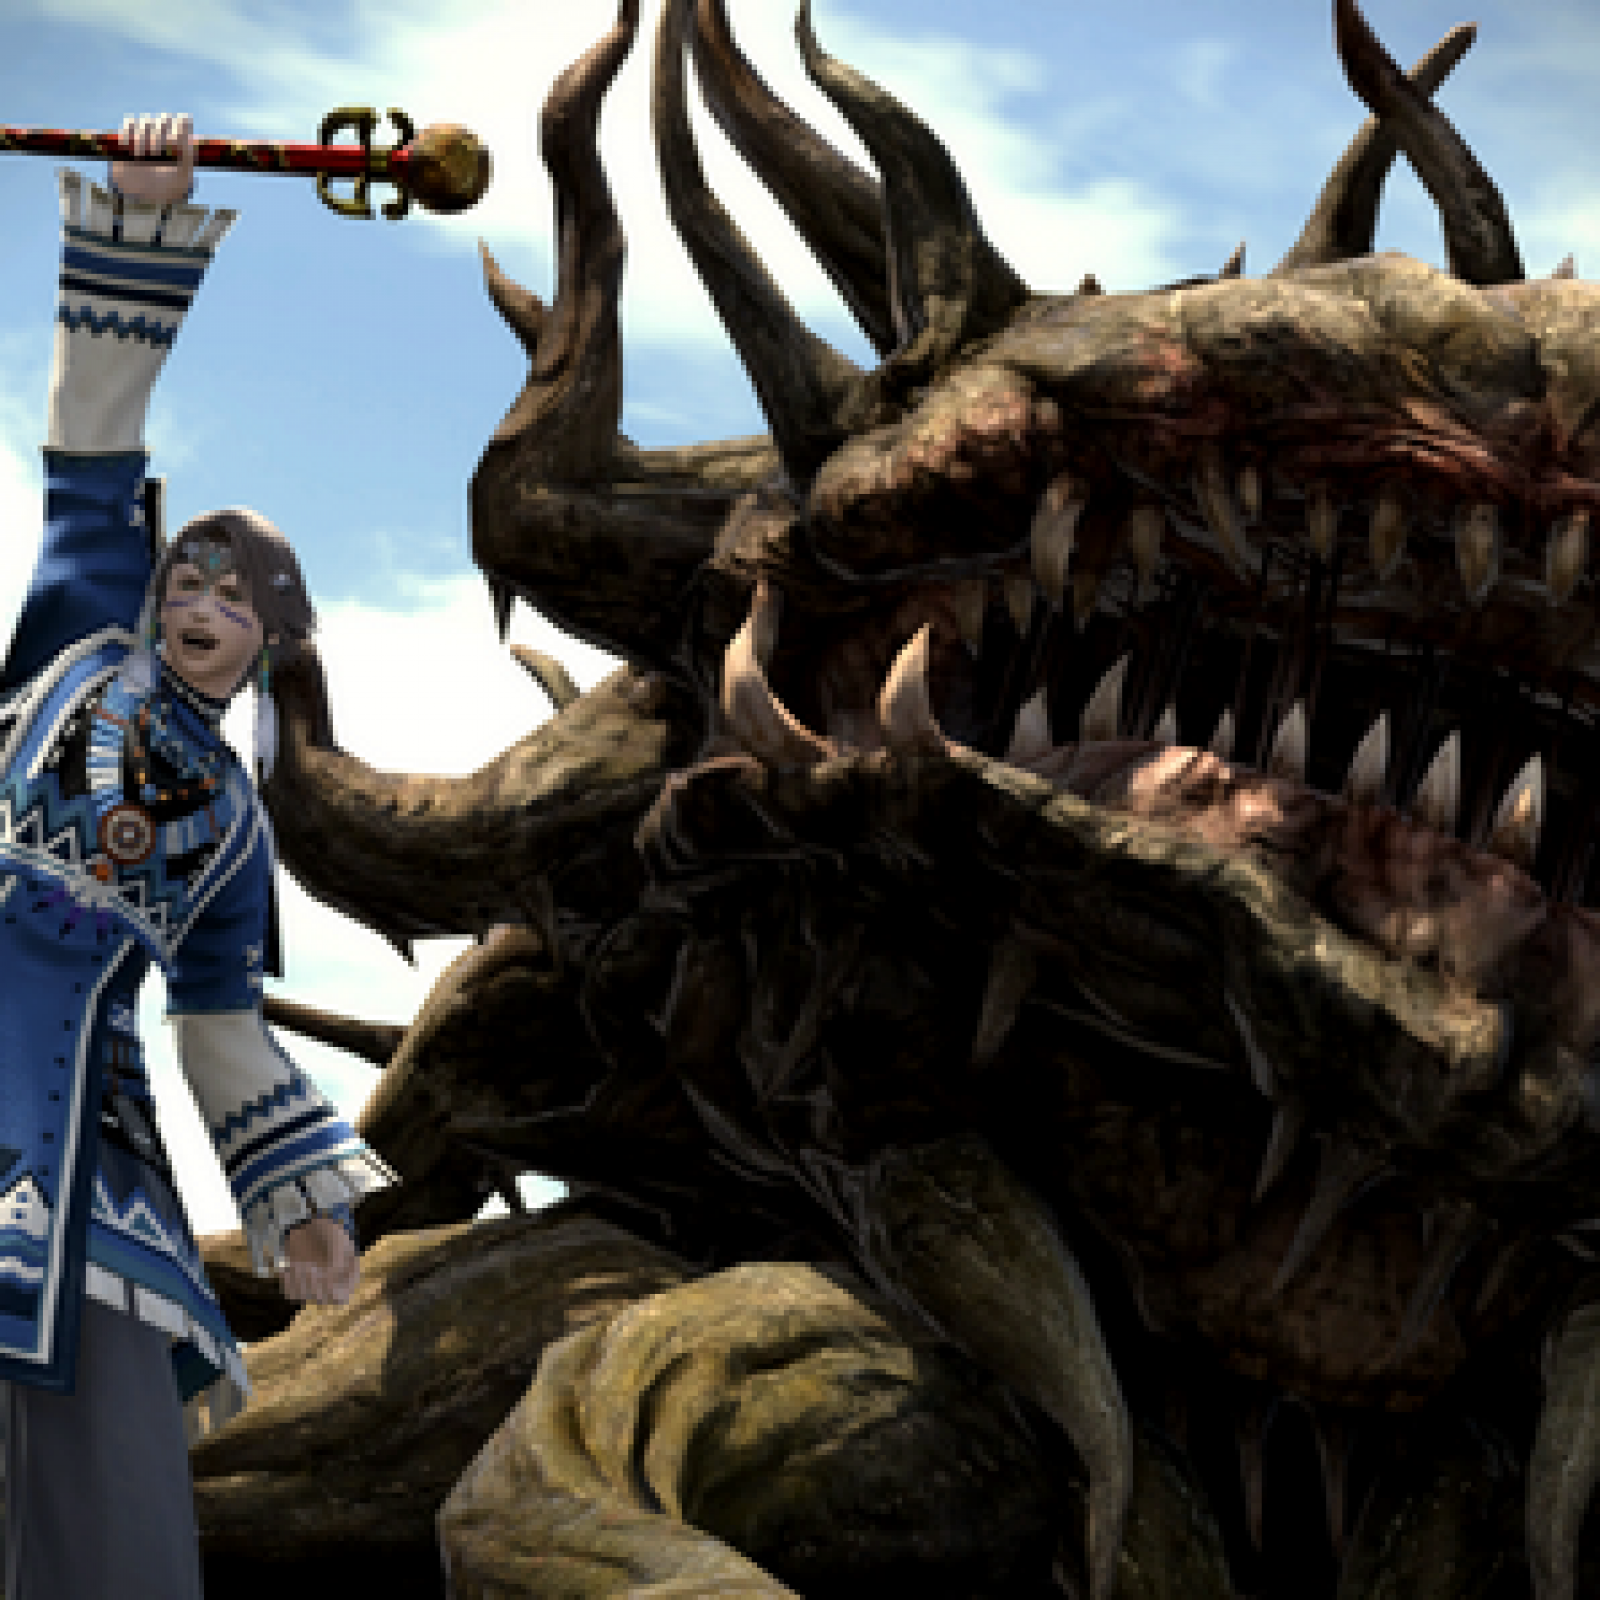 Final Fantasy Xiv 4 5 Patch Notes Update Brings New Blue Mage Job Quests And More